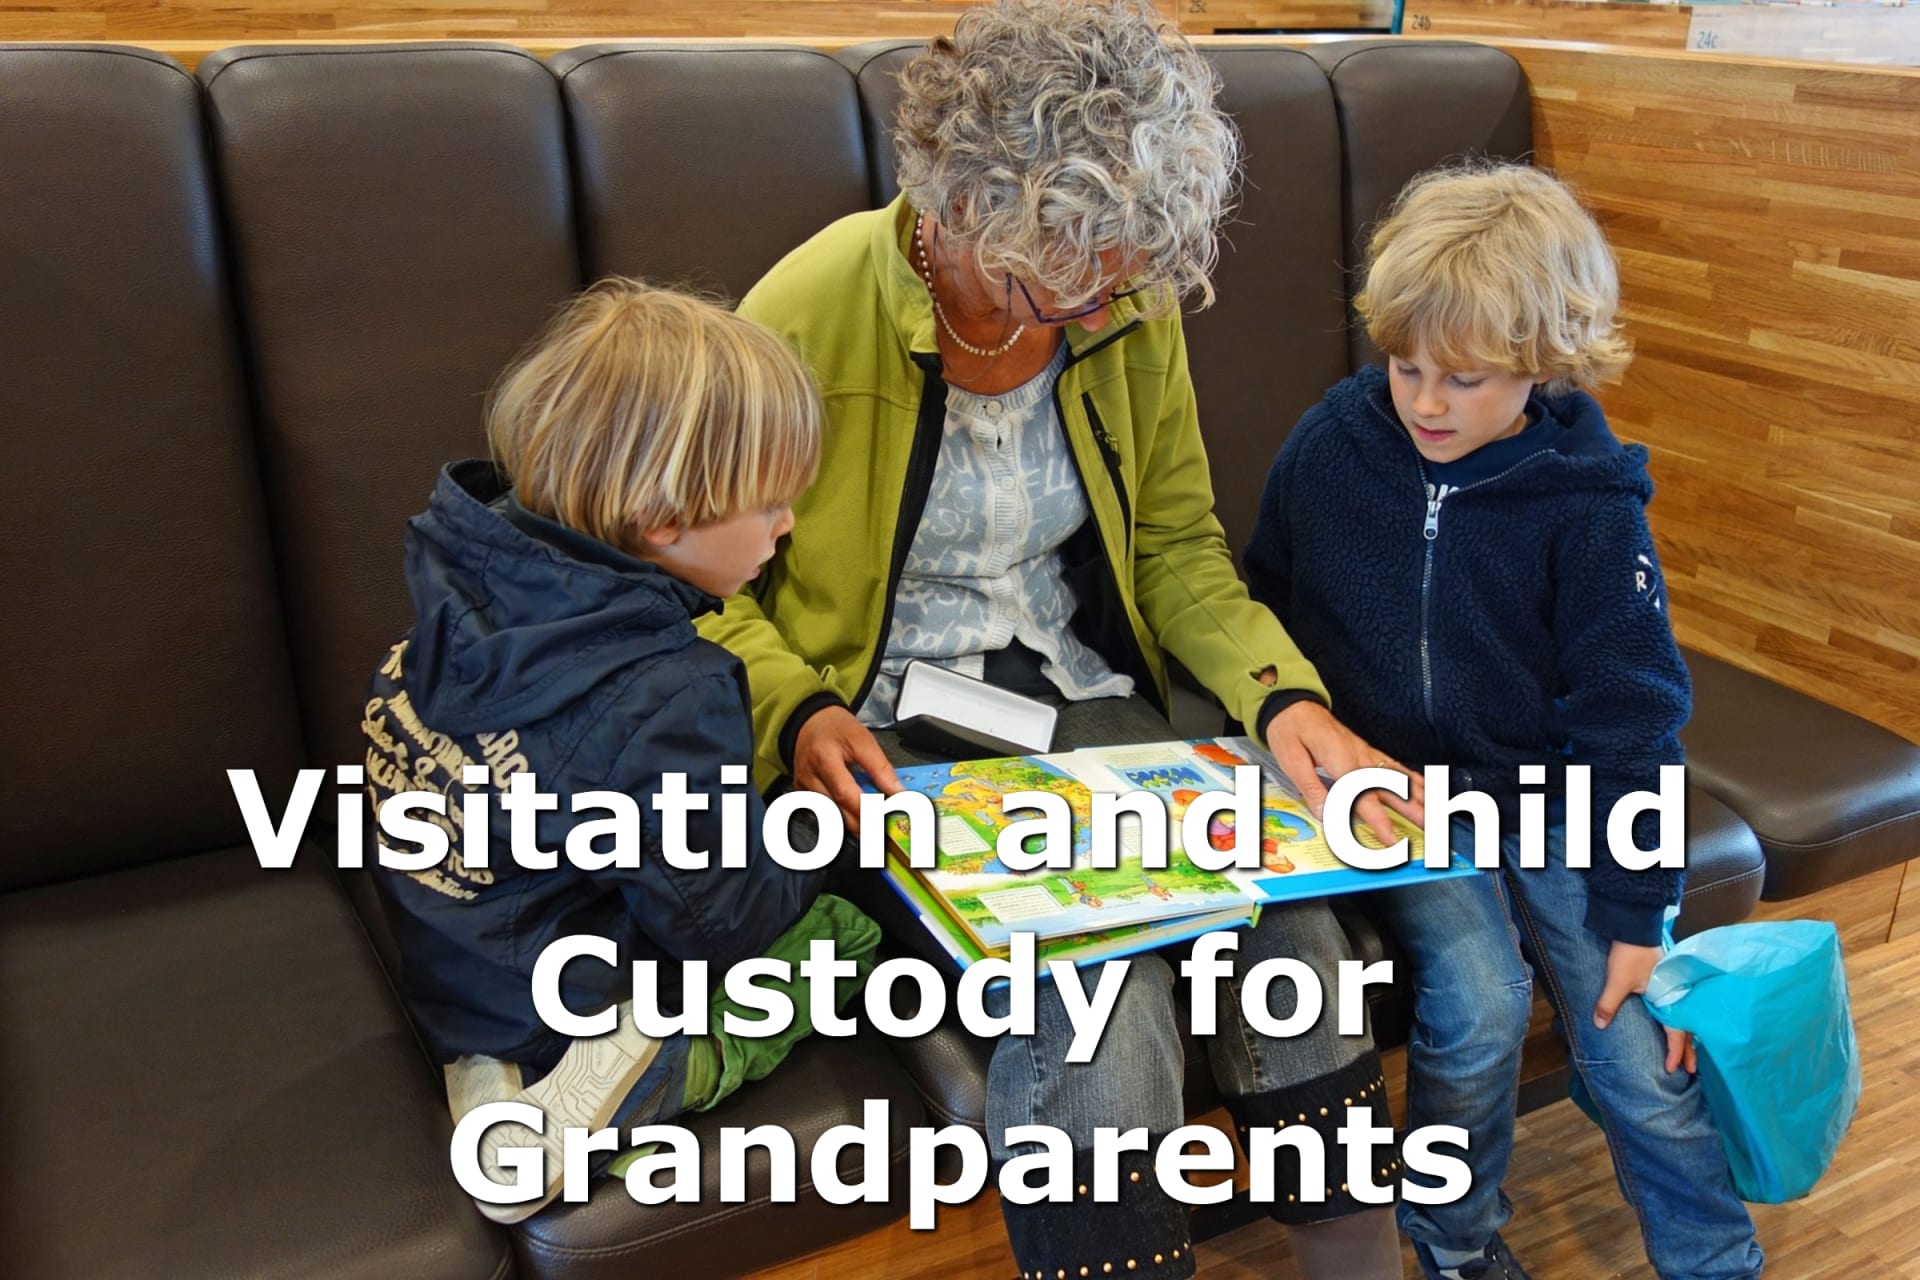 An older woman with gray hair and a green jacket reads a children's book to her two grandchildren with blonde hair. The legal custody law that's fit for everyone is Ilarraza Law. Our family law firm specializes in custody for grandparents, providing a quick and affordable process that allows you to legally protect your grandchildren's future as soon as possible.